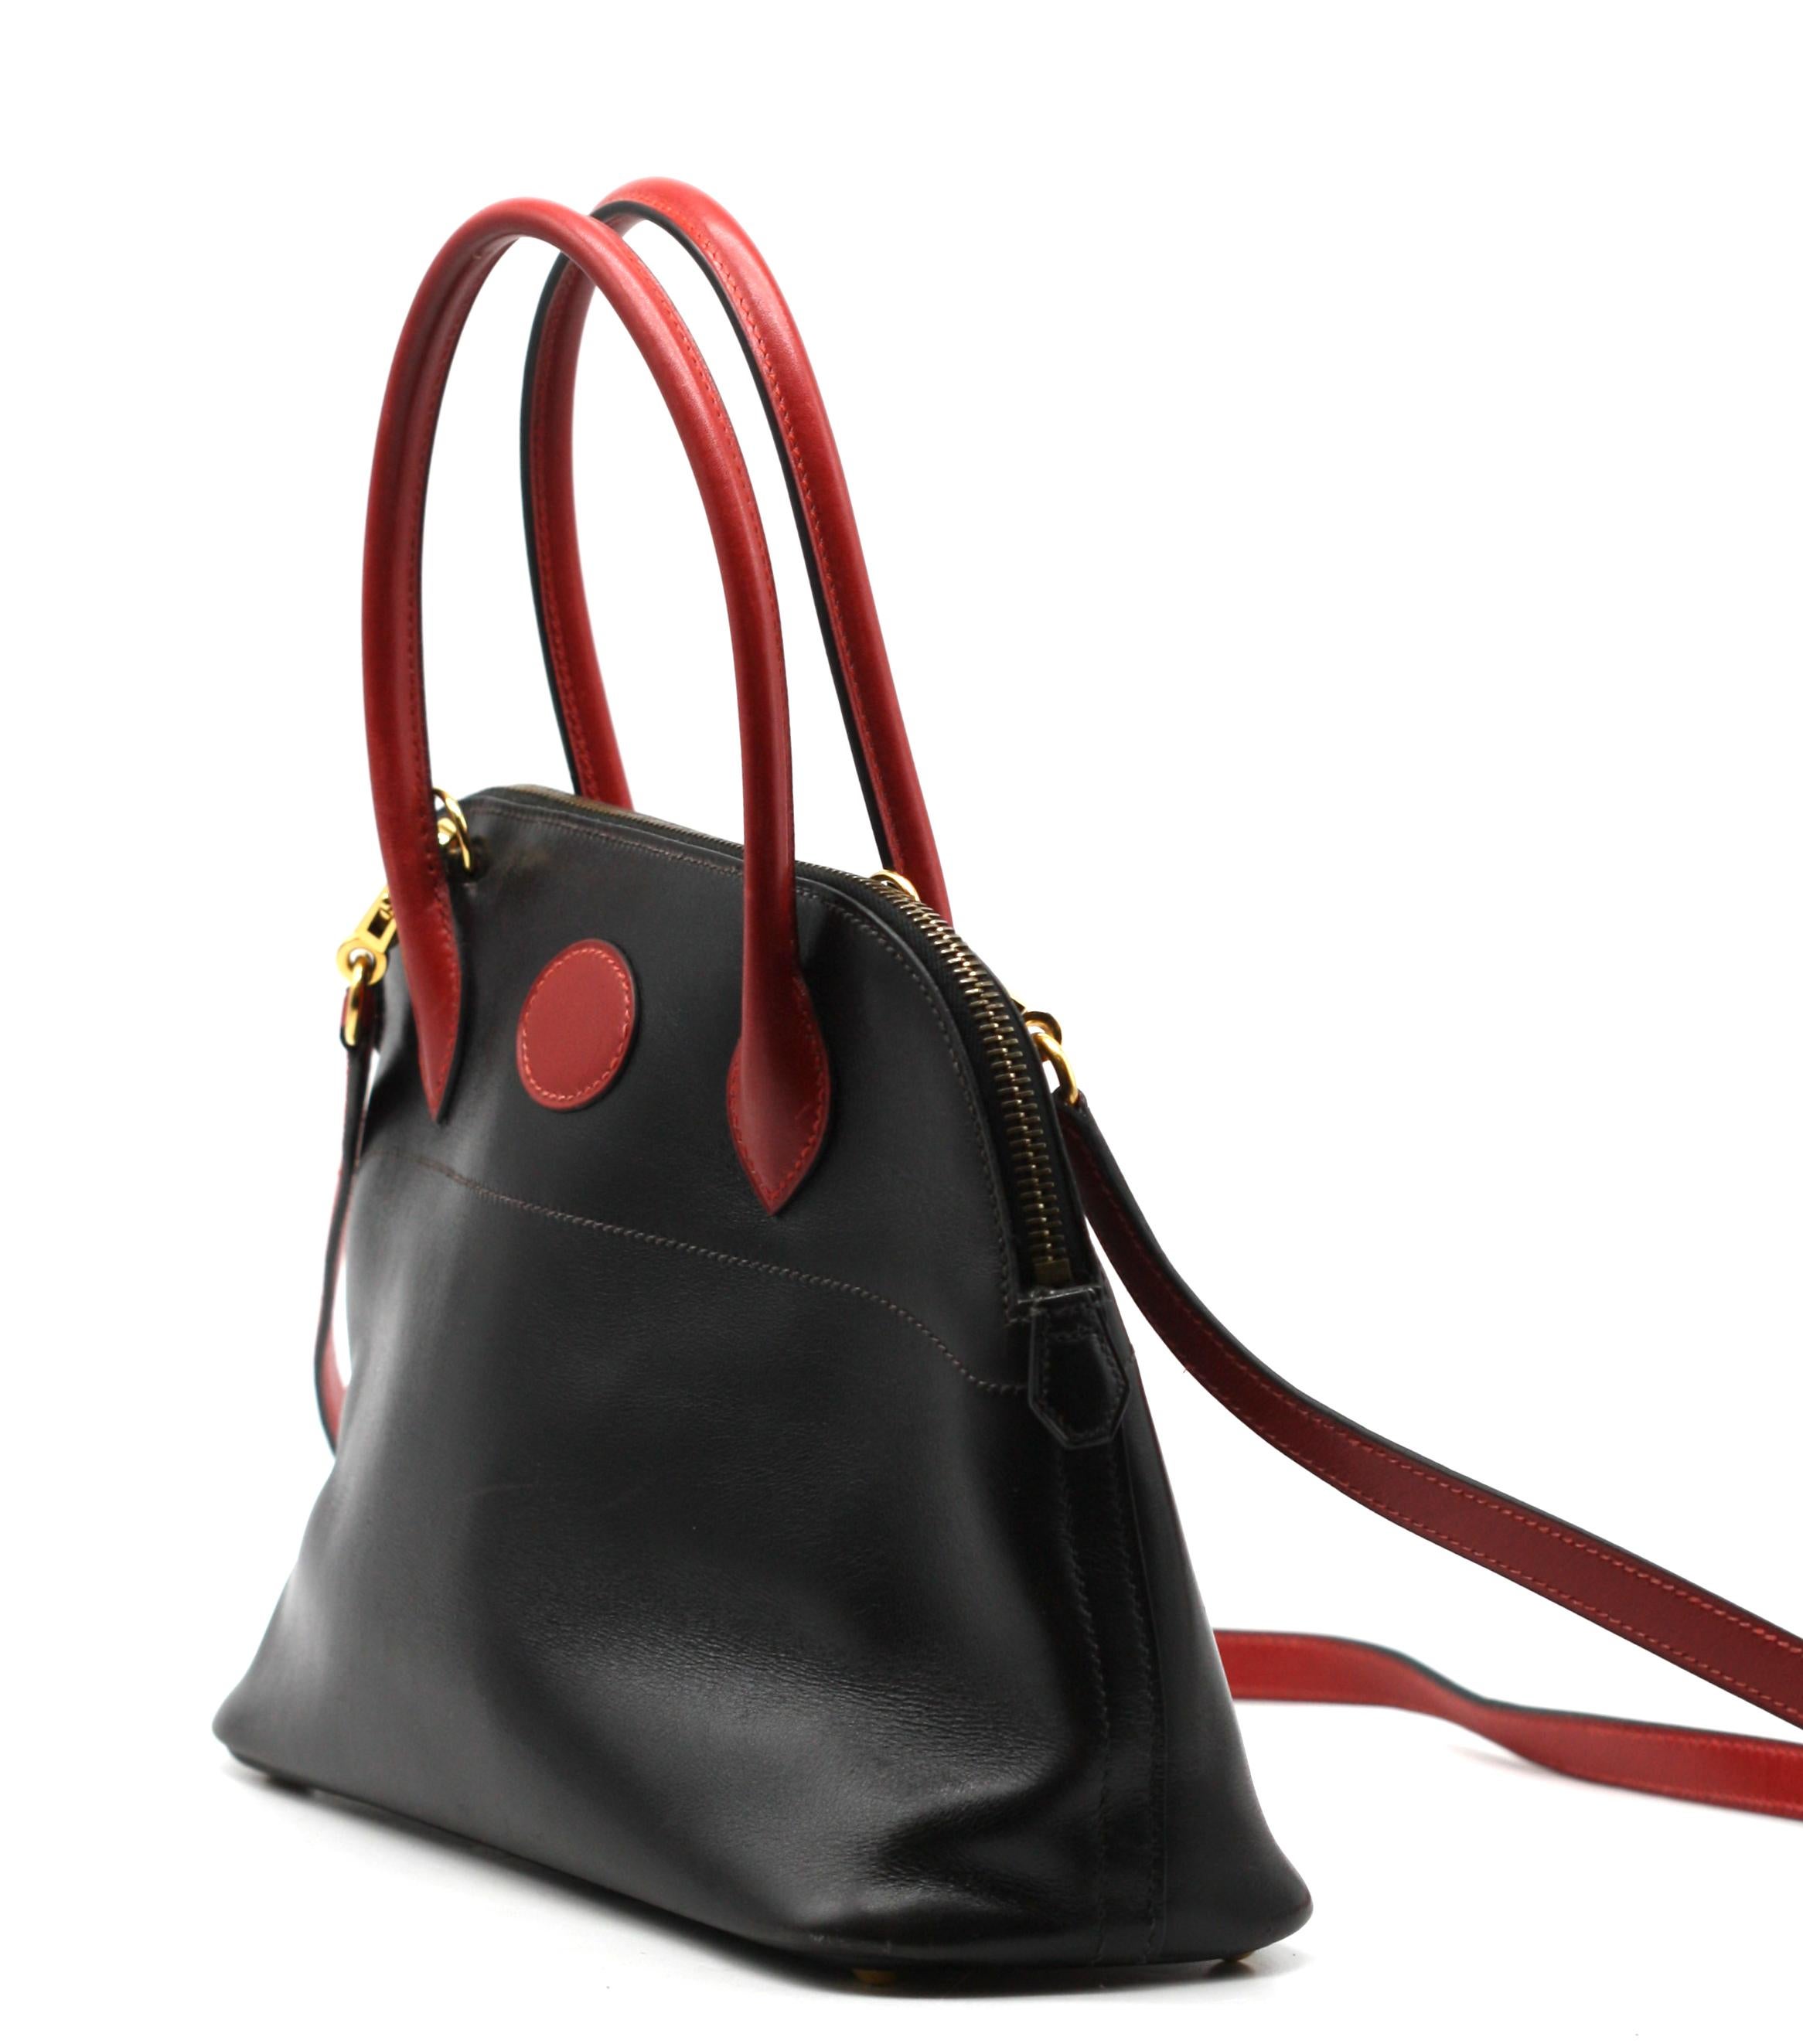 Hermes Box Calf Black and Red Leather Bolide Handbag In Good Condition For Sale In West Palm Beach, FL